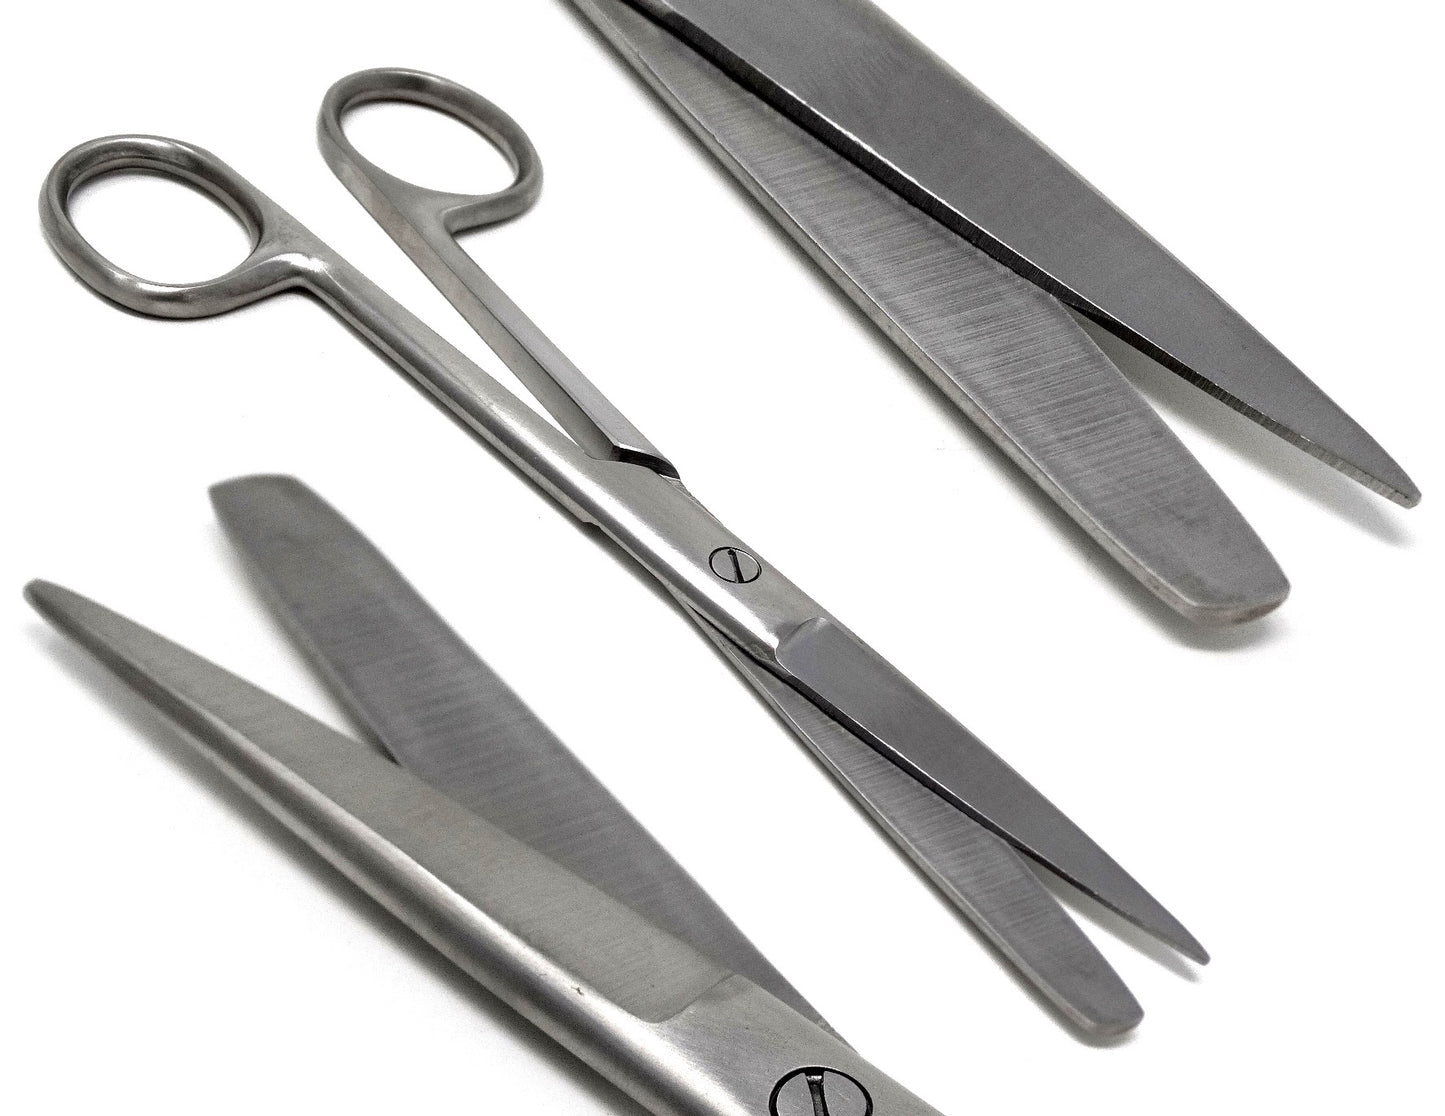 Dissecting Scissors, Sharp / Blunt Point Blades, 4.5" (11.43cm), Straight, Premium Quality, Stainless Steel